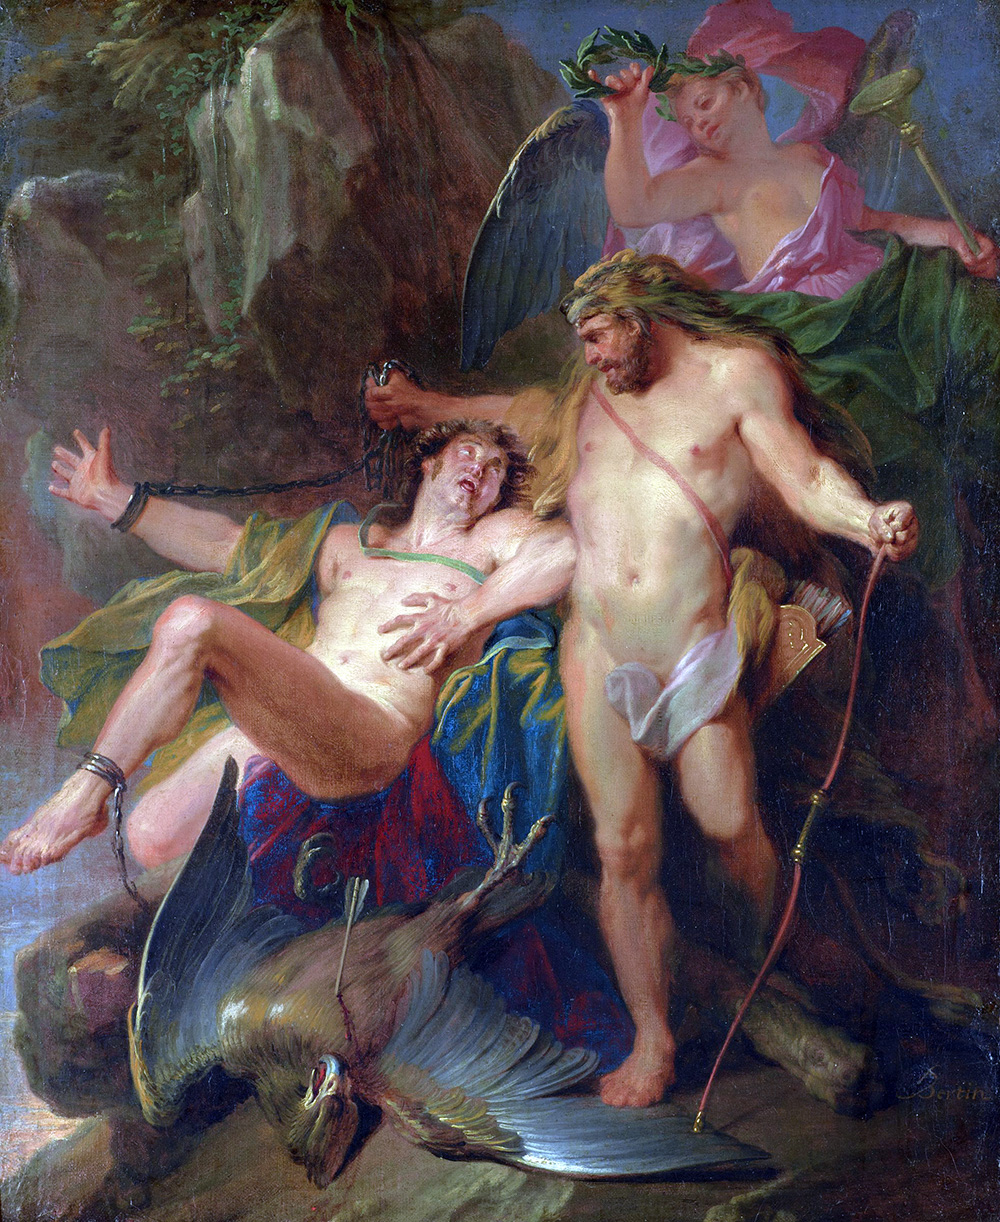 Hercules liberating the chained Prometheus